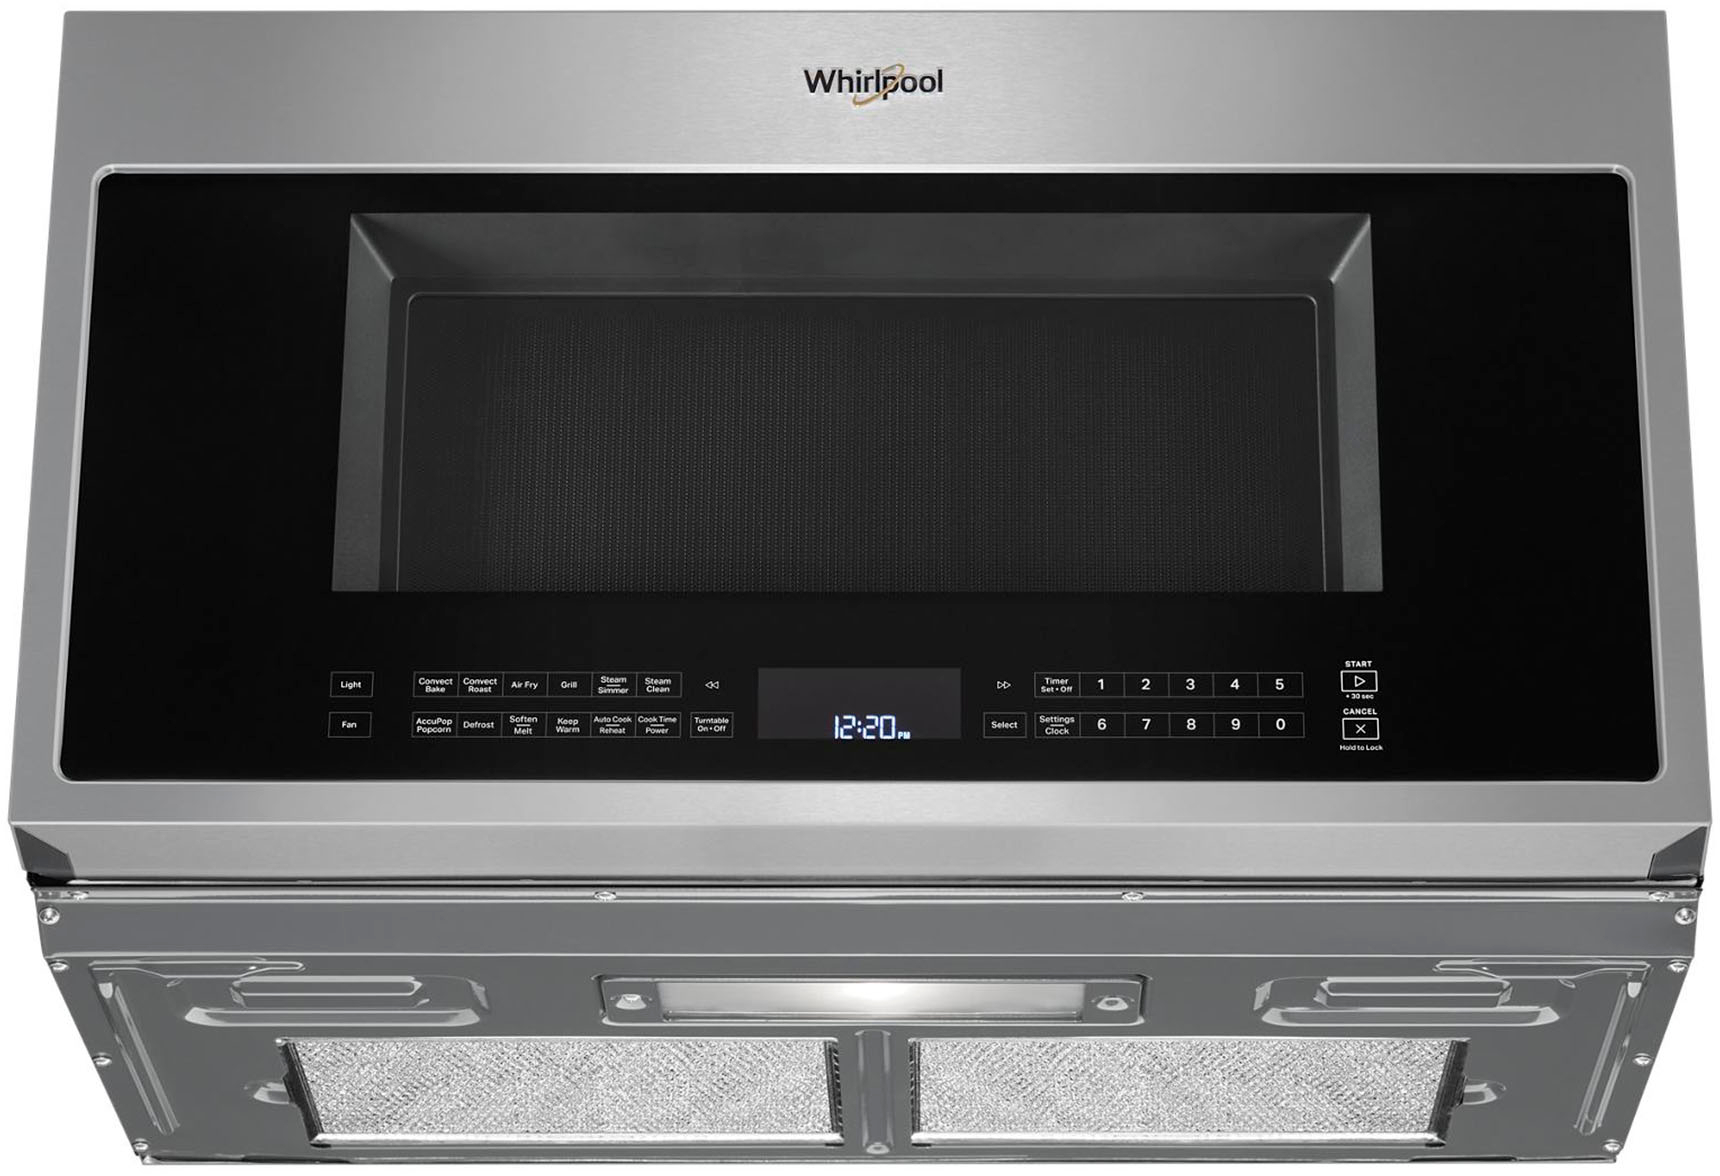 Whirlpool 1.9 Cu. Ft. Convection Over-the-Range Microwave with Air Fry Mode  Stainless Steel WMH78519LZ - Best Buy